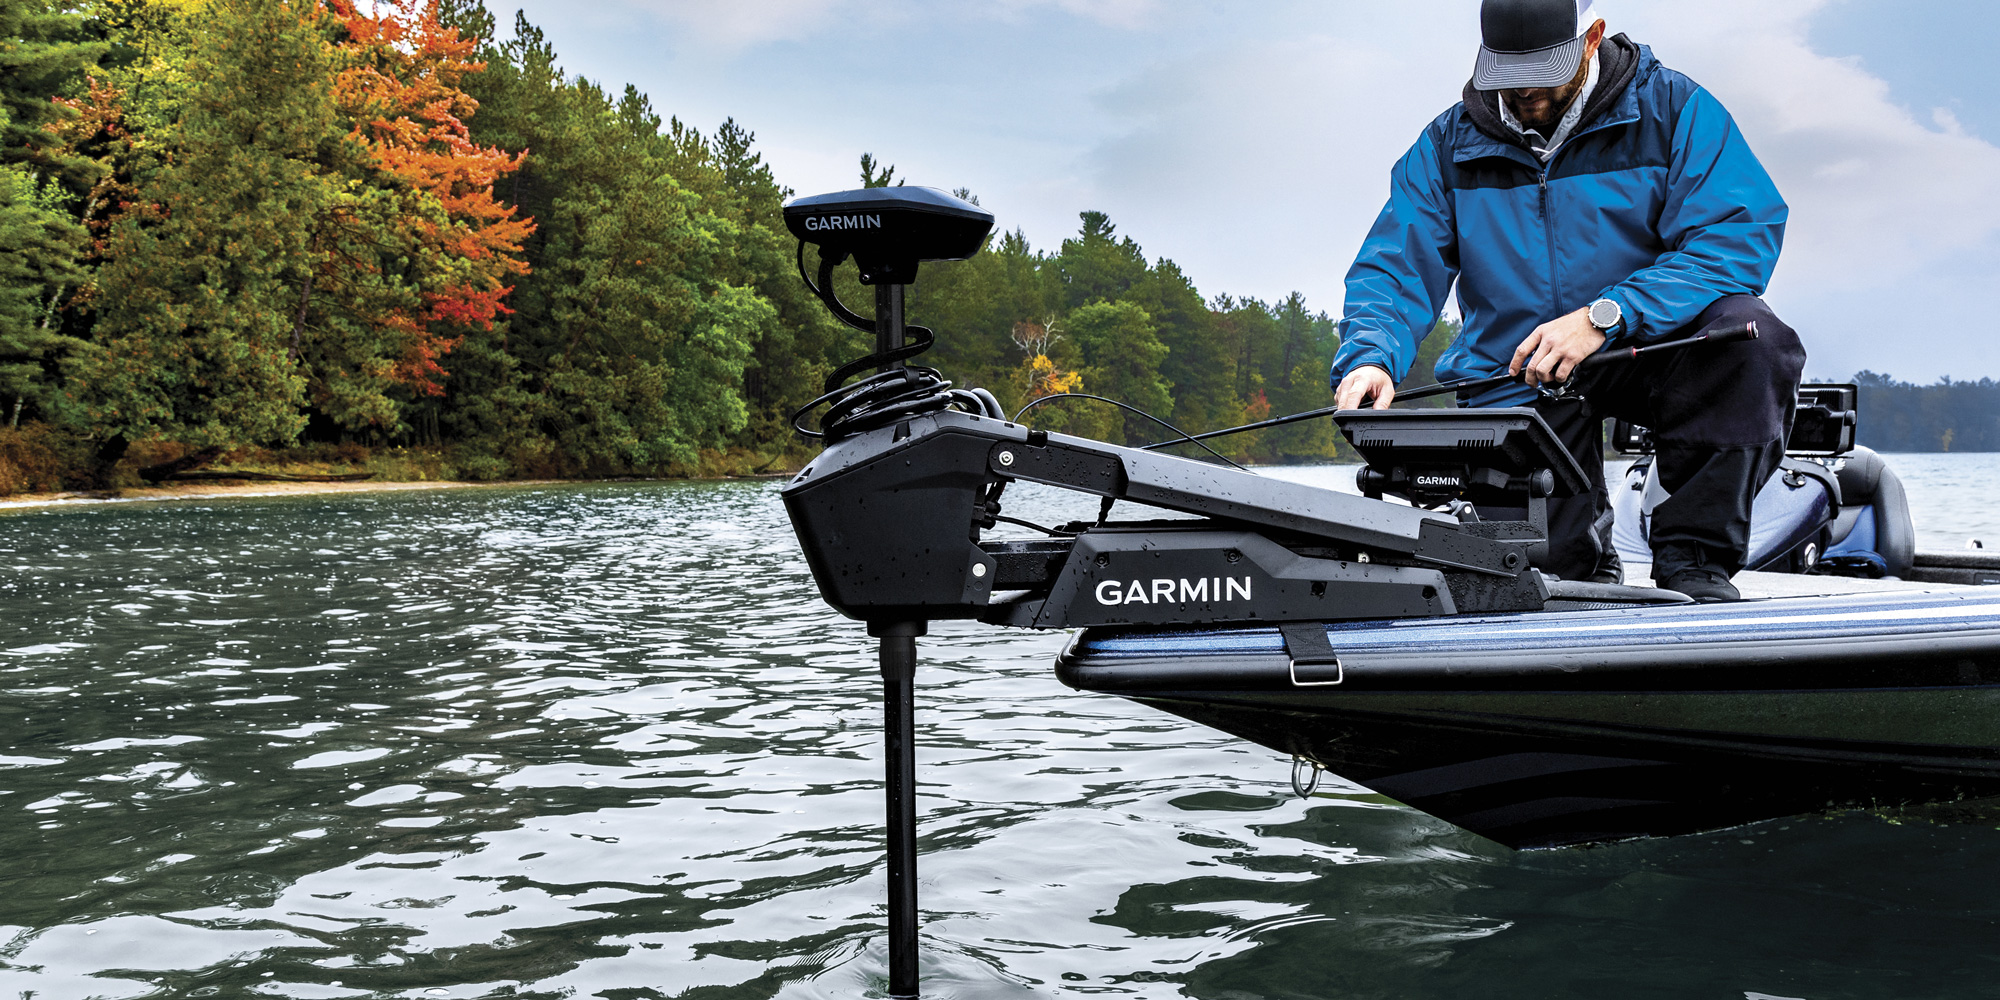 Roumbanis Gets First Look at New Garmin Force Trolling Motor